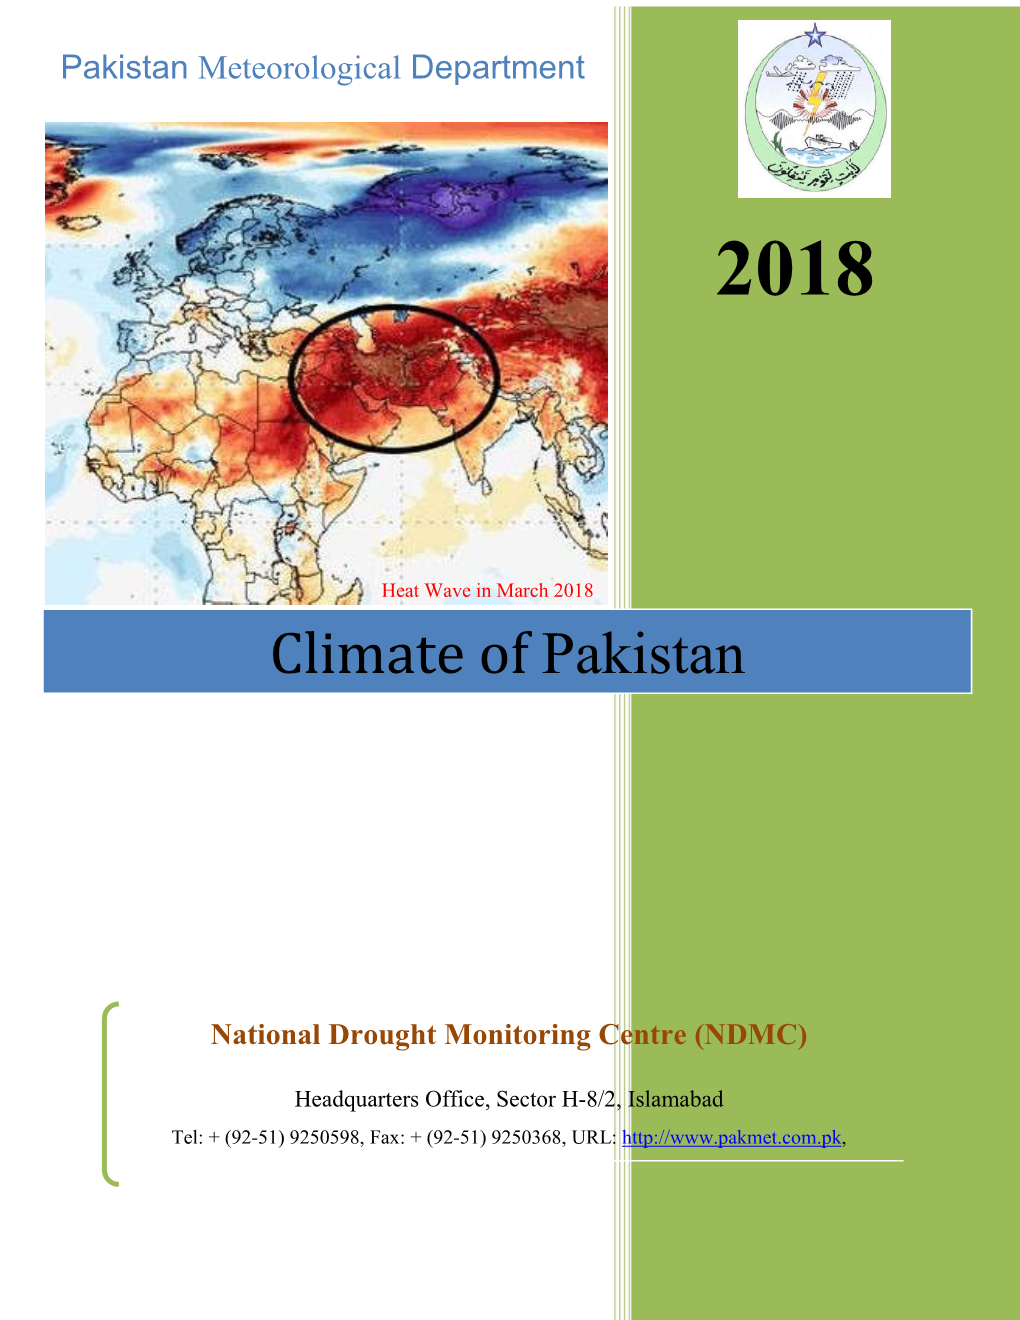 Climate of Pakistan in 2018